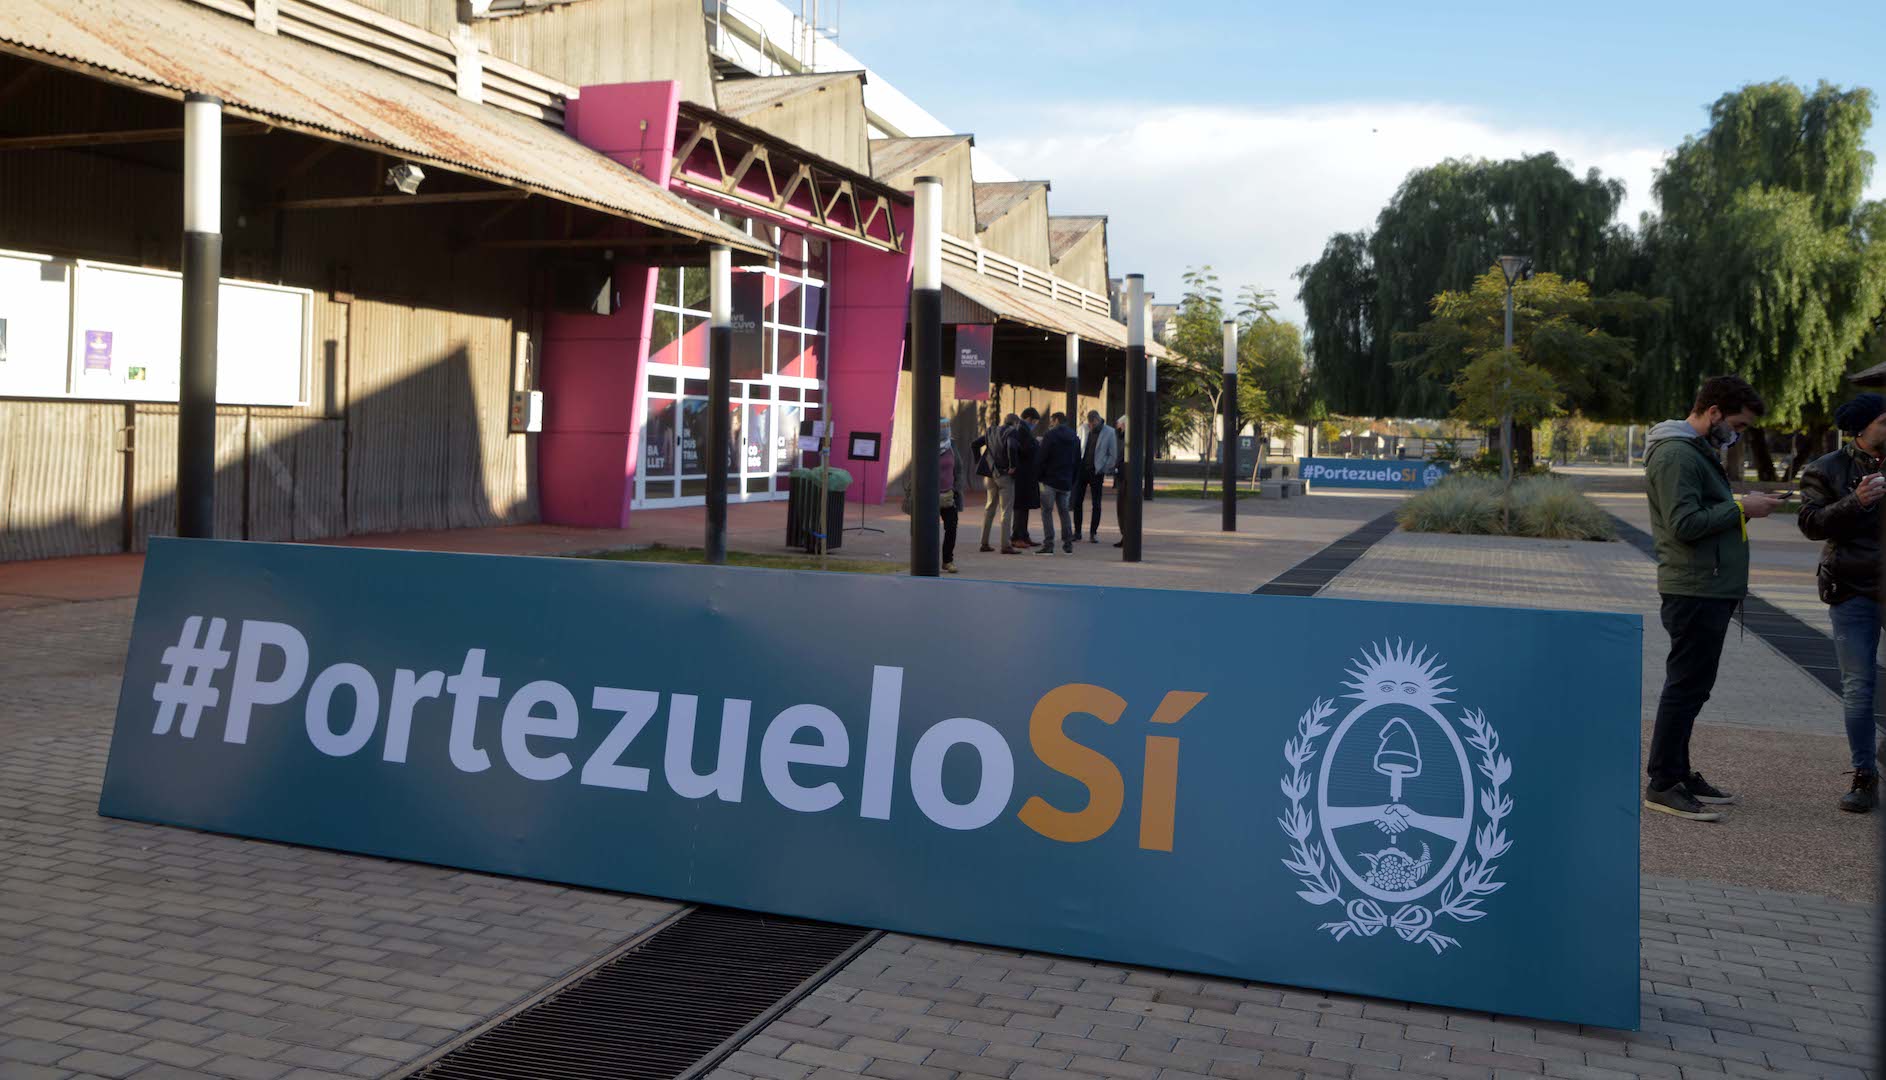 <p>A banner that expresses support for the Portezuelo project (image: Government of Mendoza)</p>